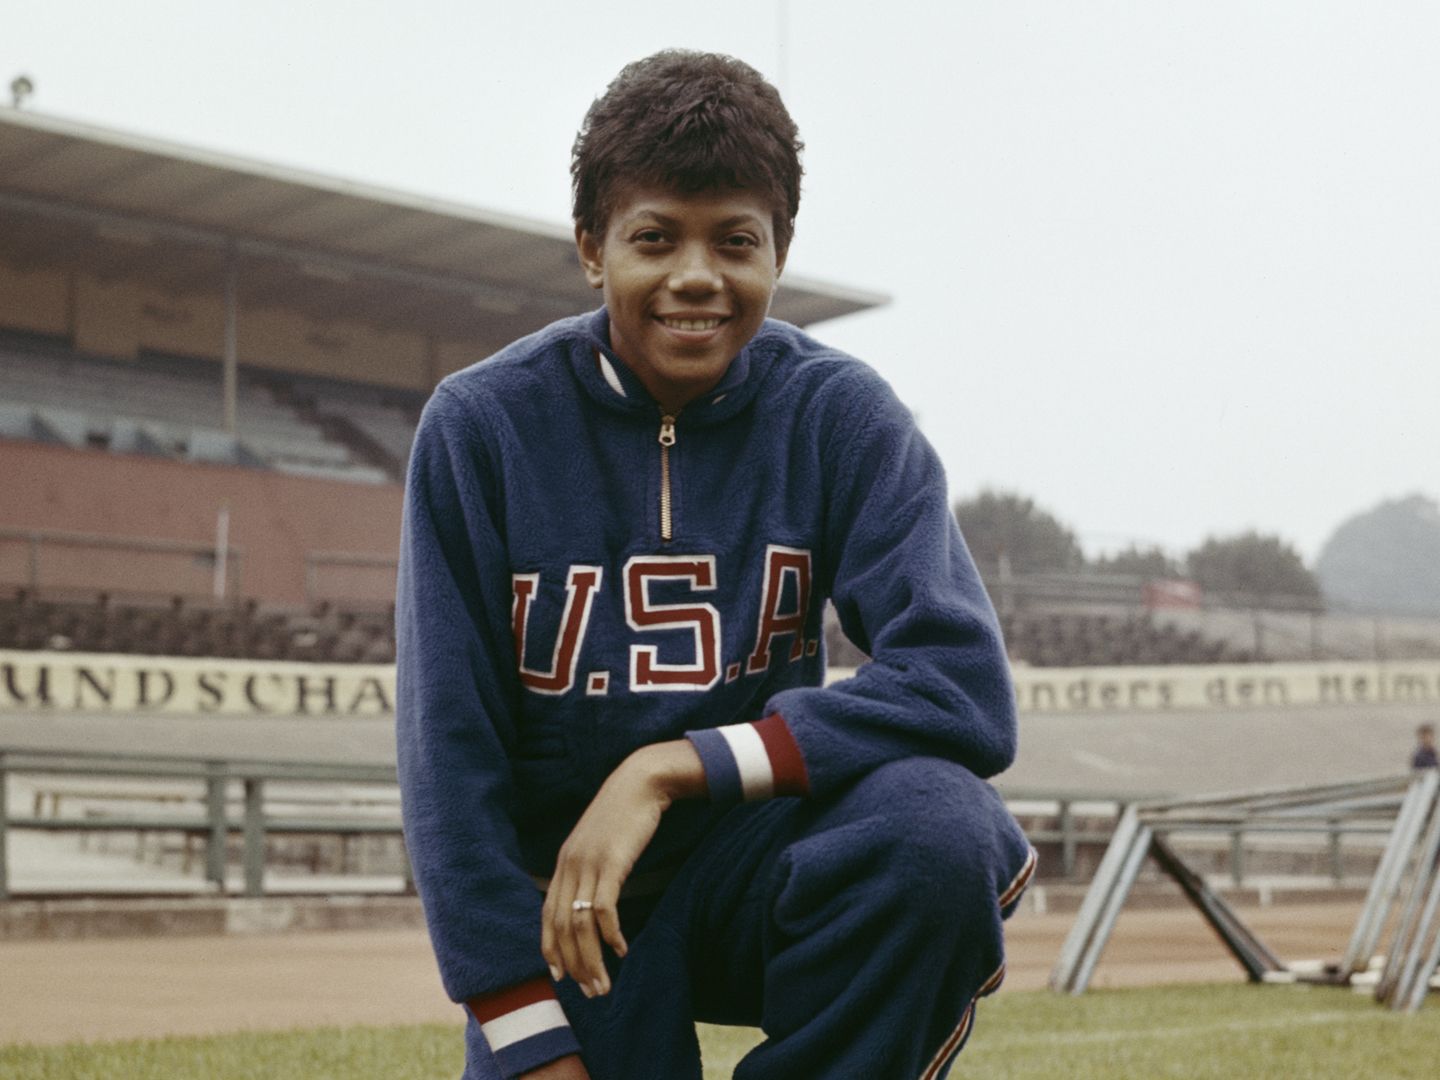 wilma rudolph as a child with her brace